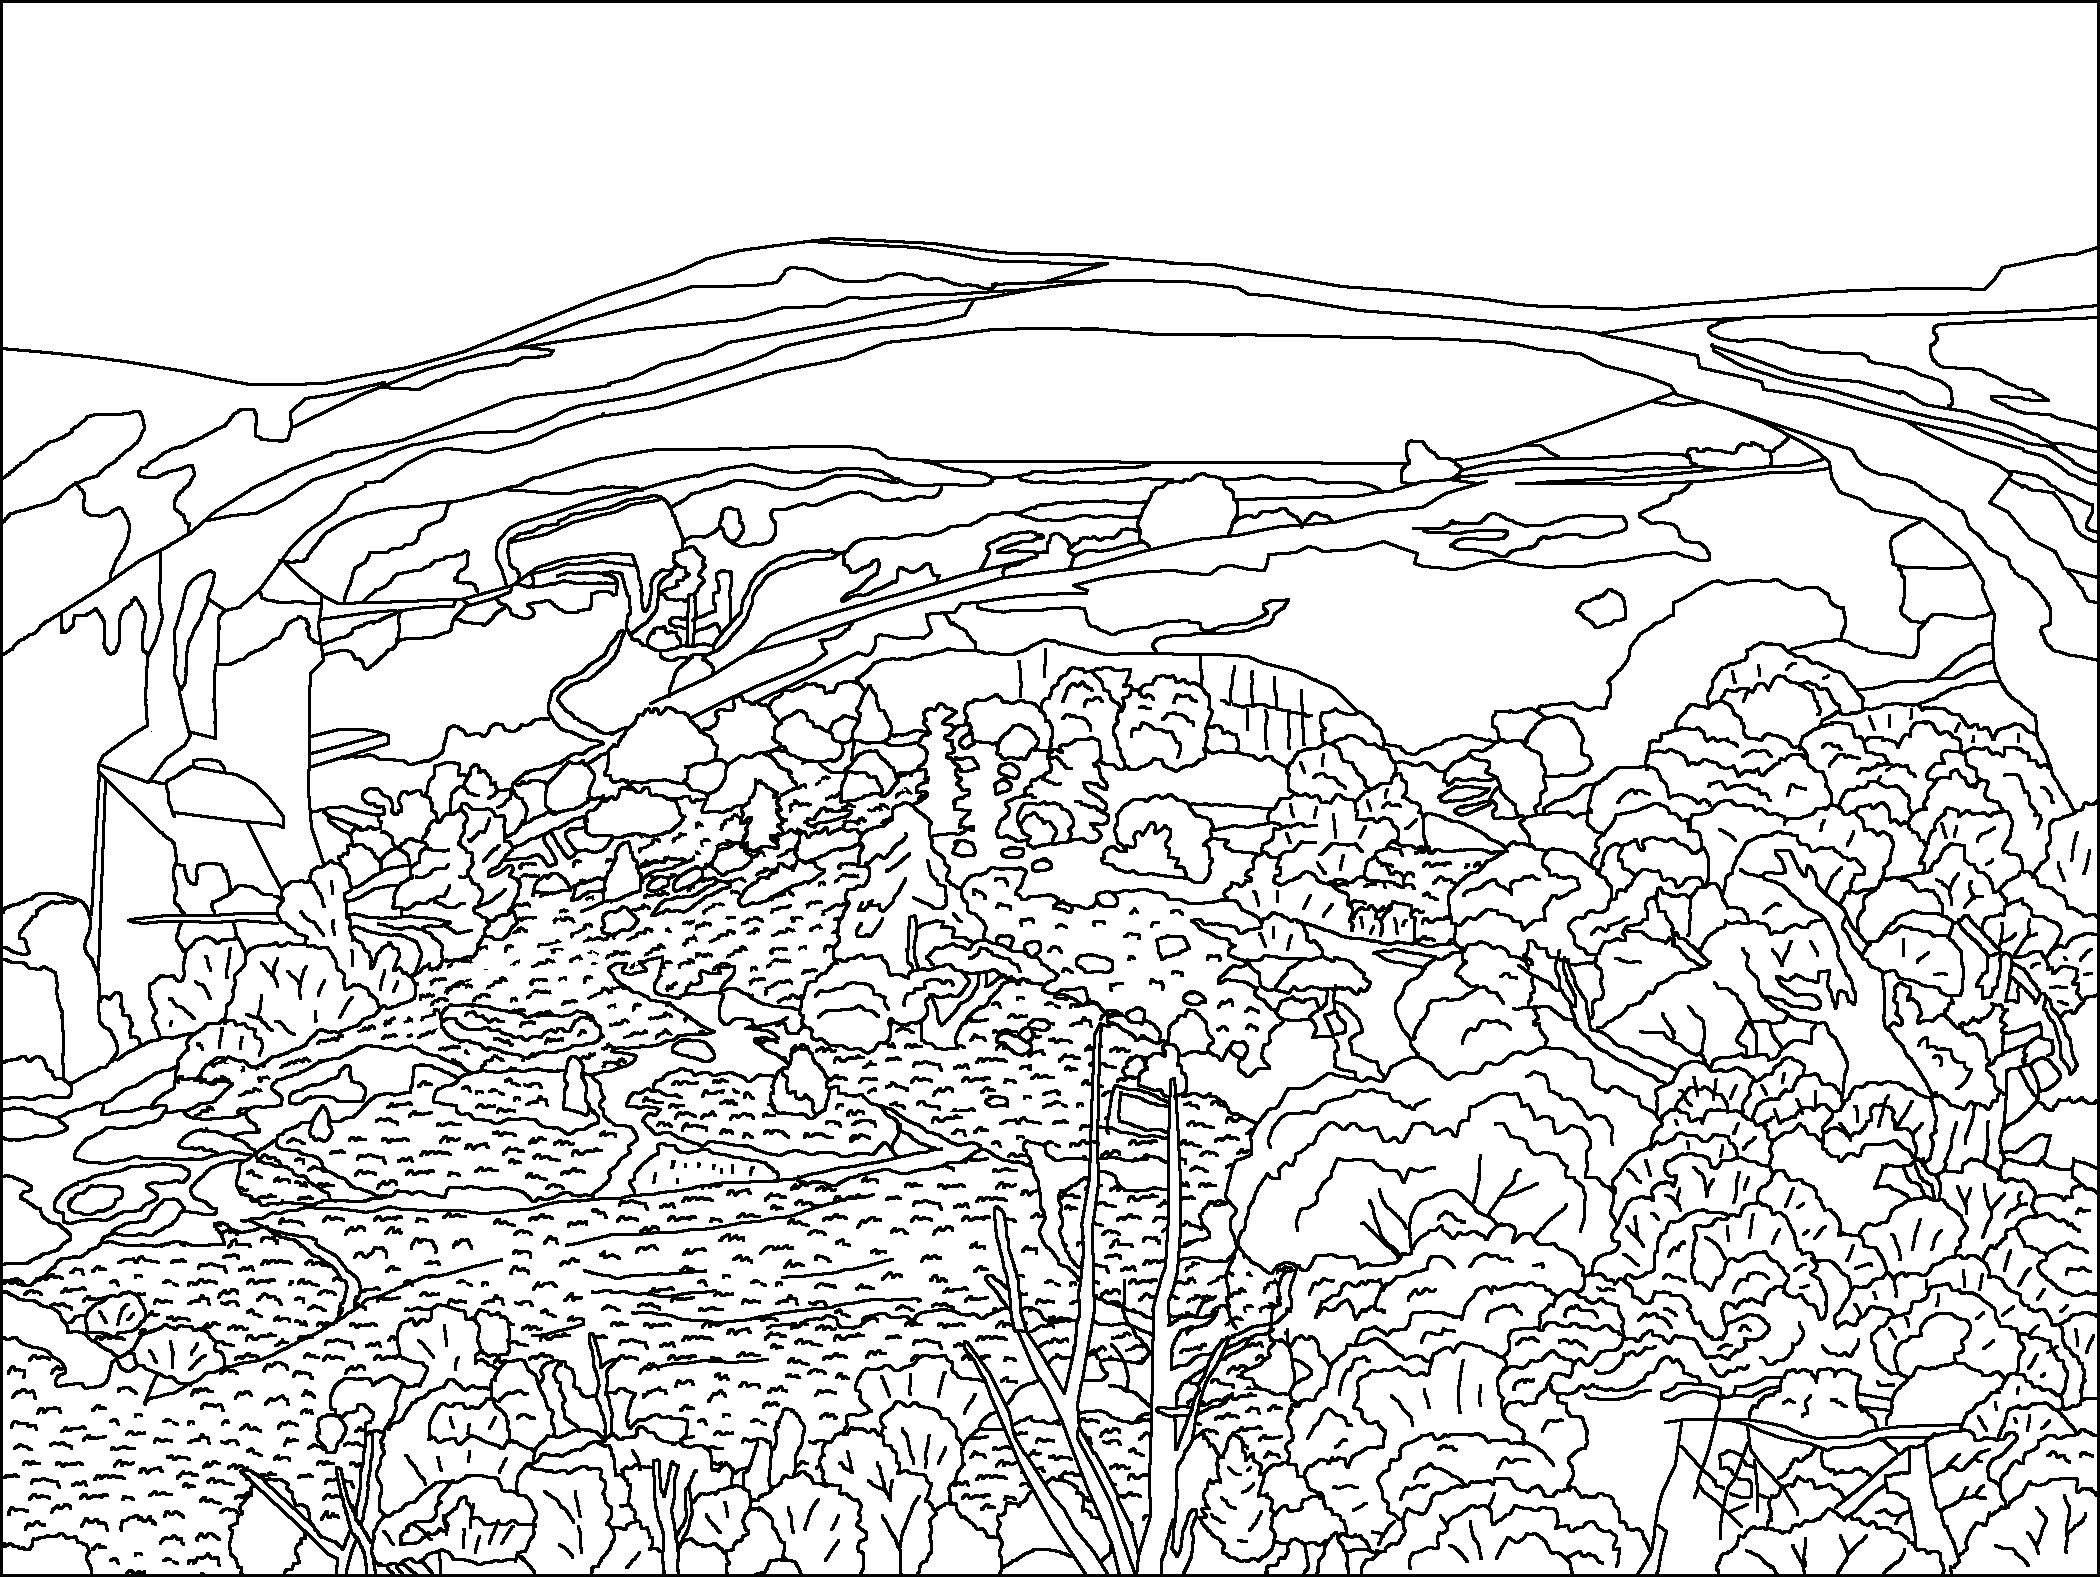 Landscape coloring pages to download and print for free